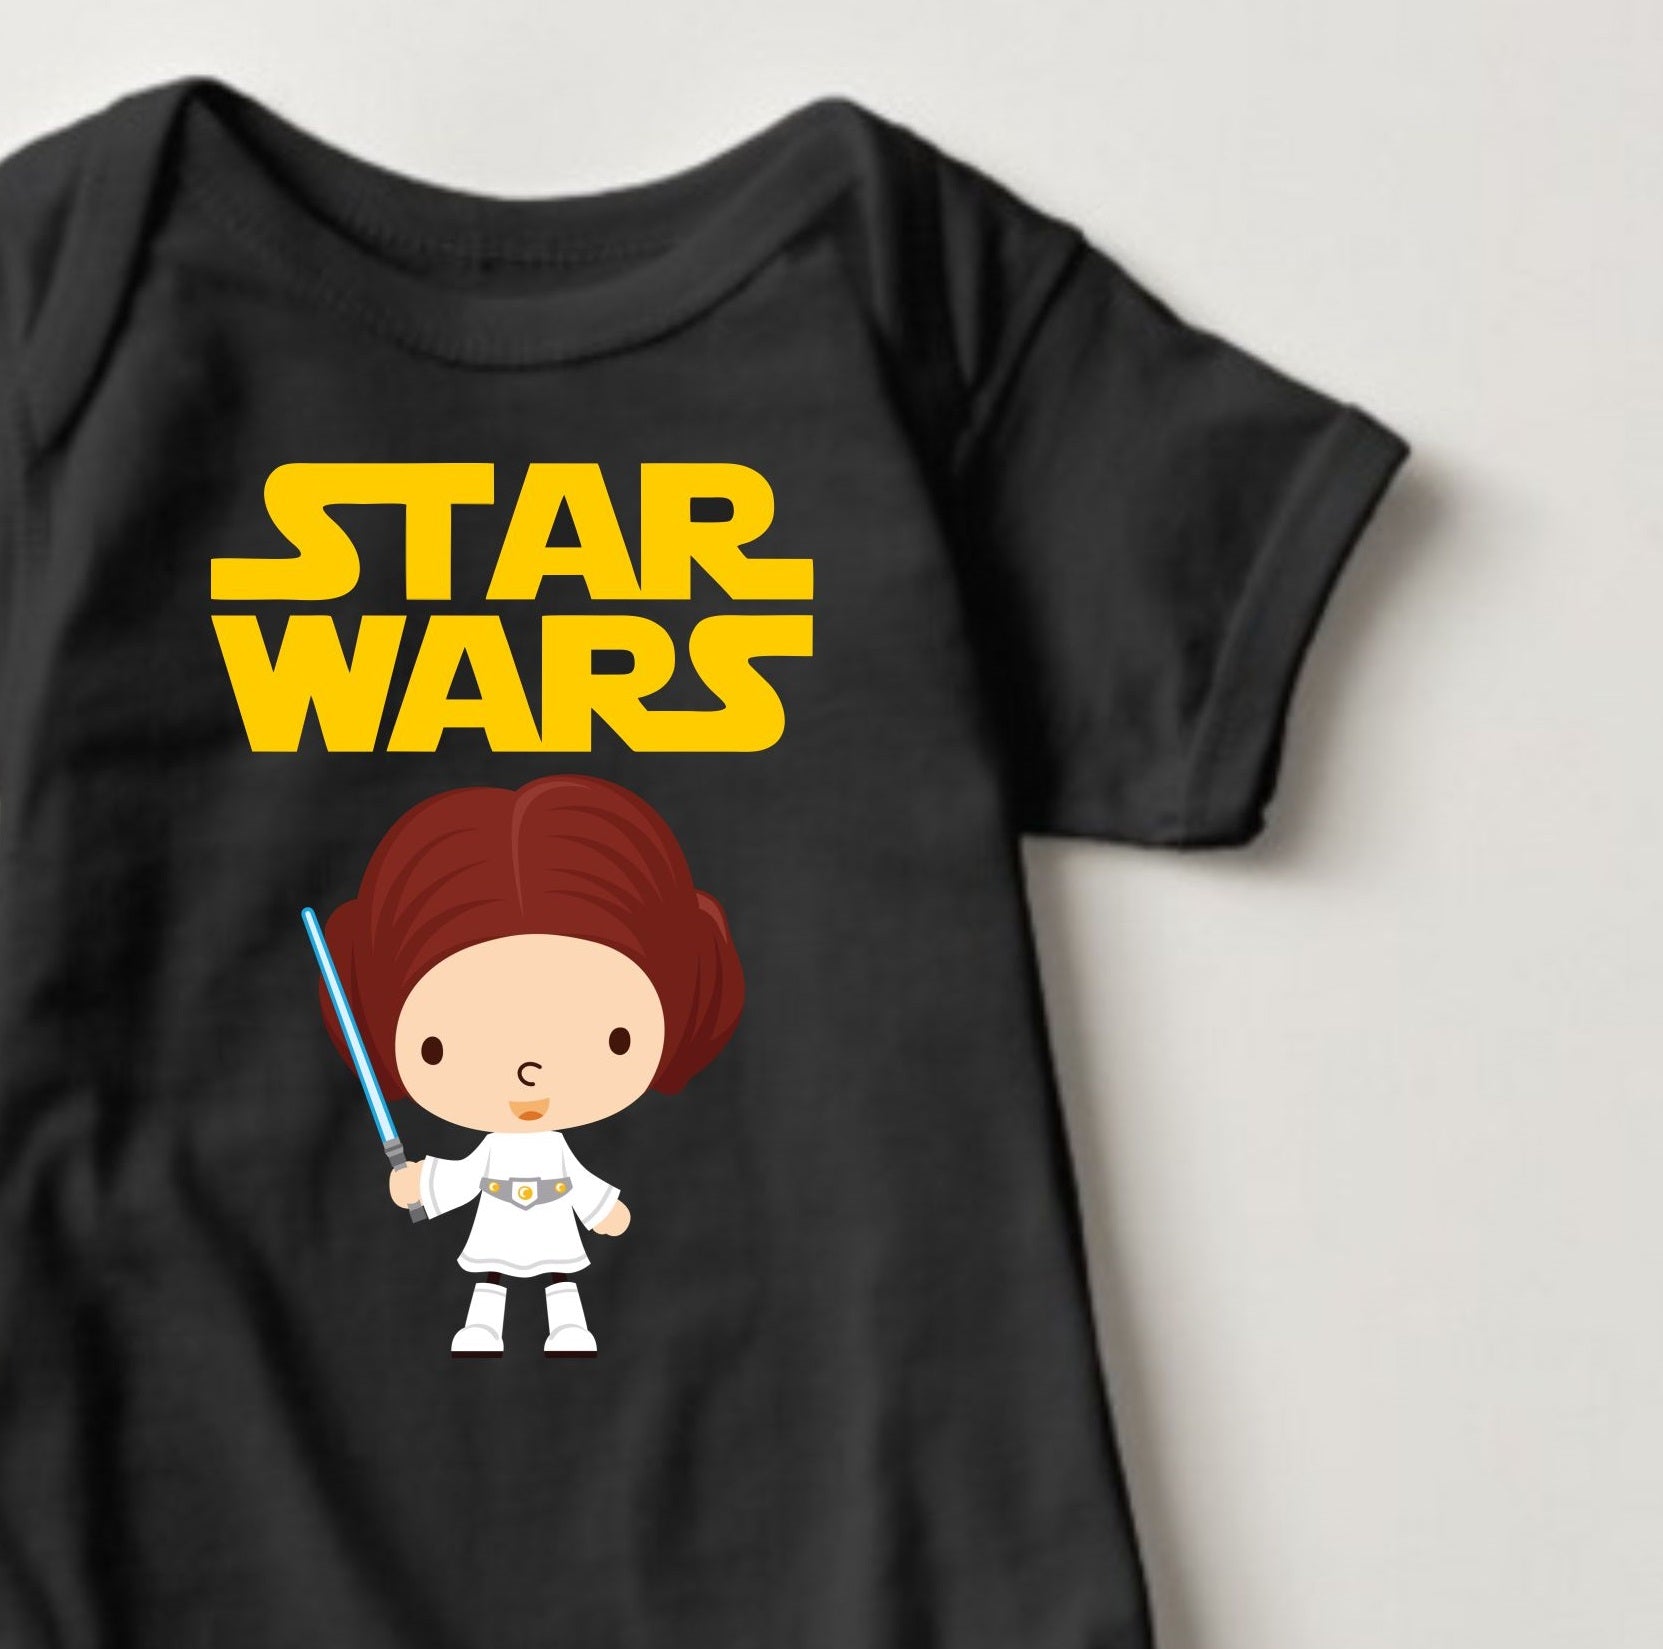 Baby Star Wars Collection Onesies - Princess Leila - MYSTYLEMYCLOTHING